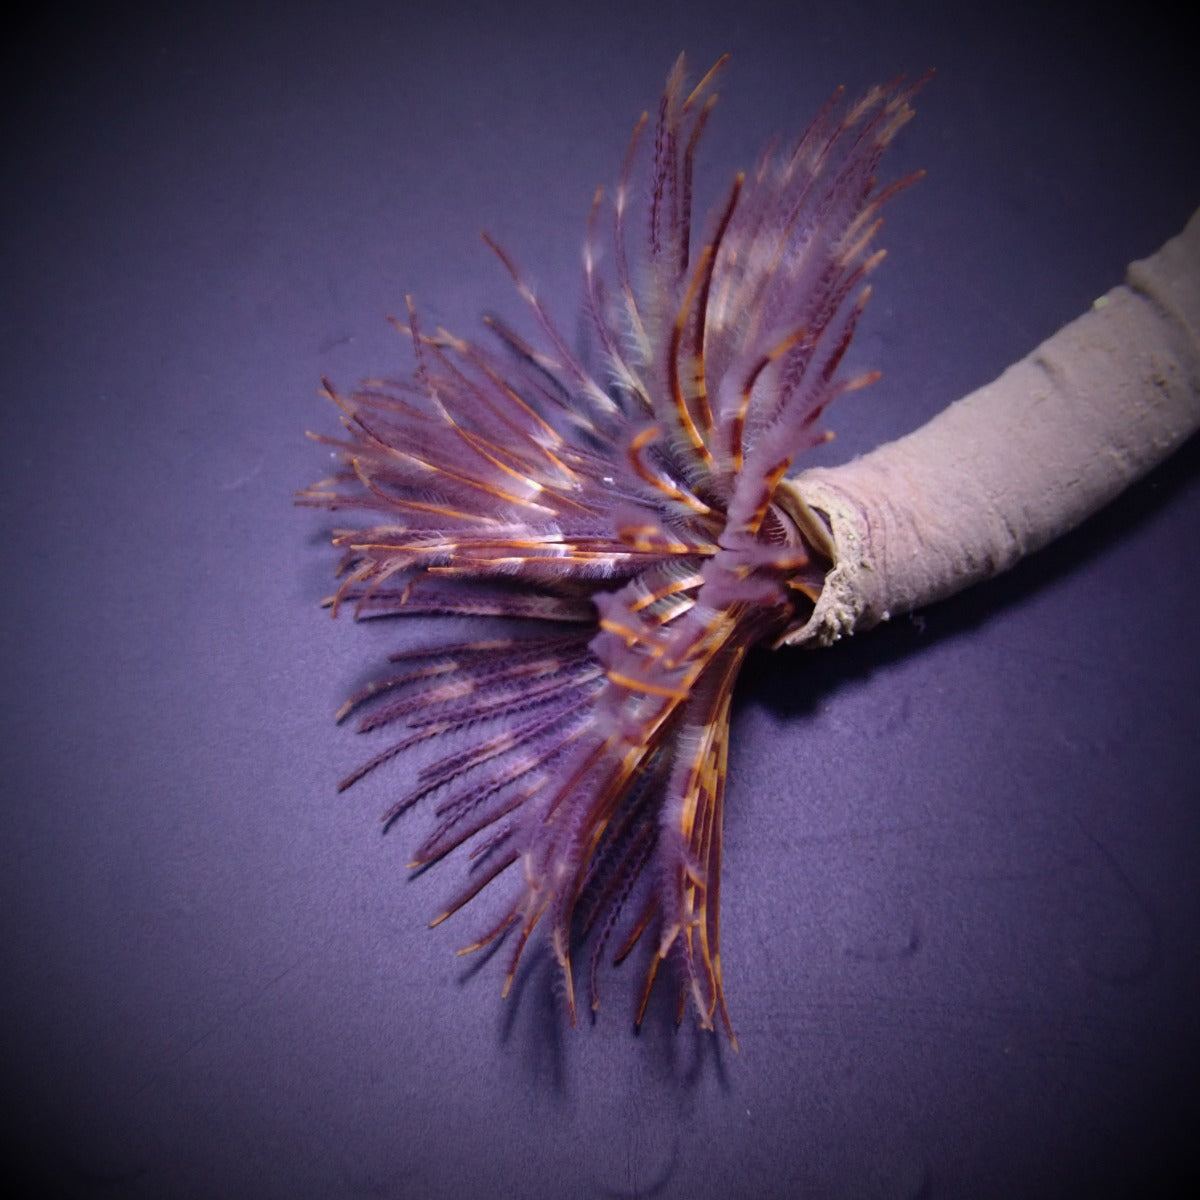 Sabellastarte magnifica - Magnificent feather duster